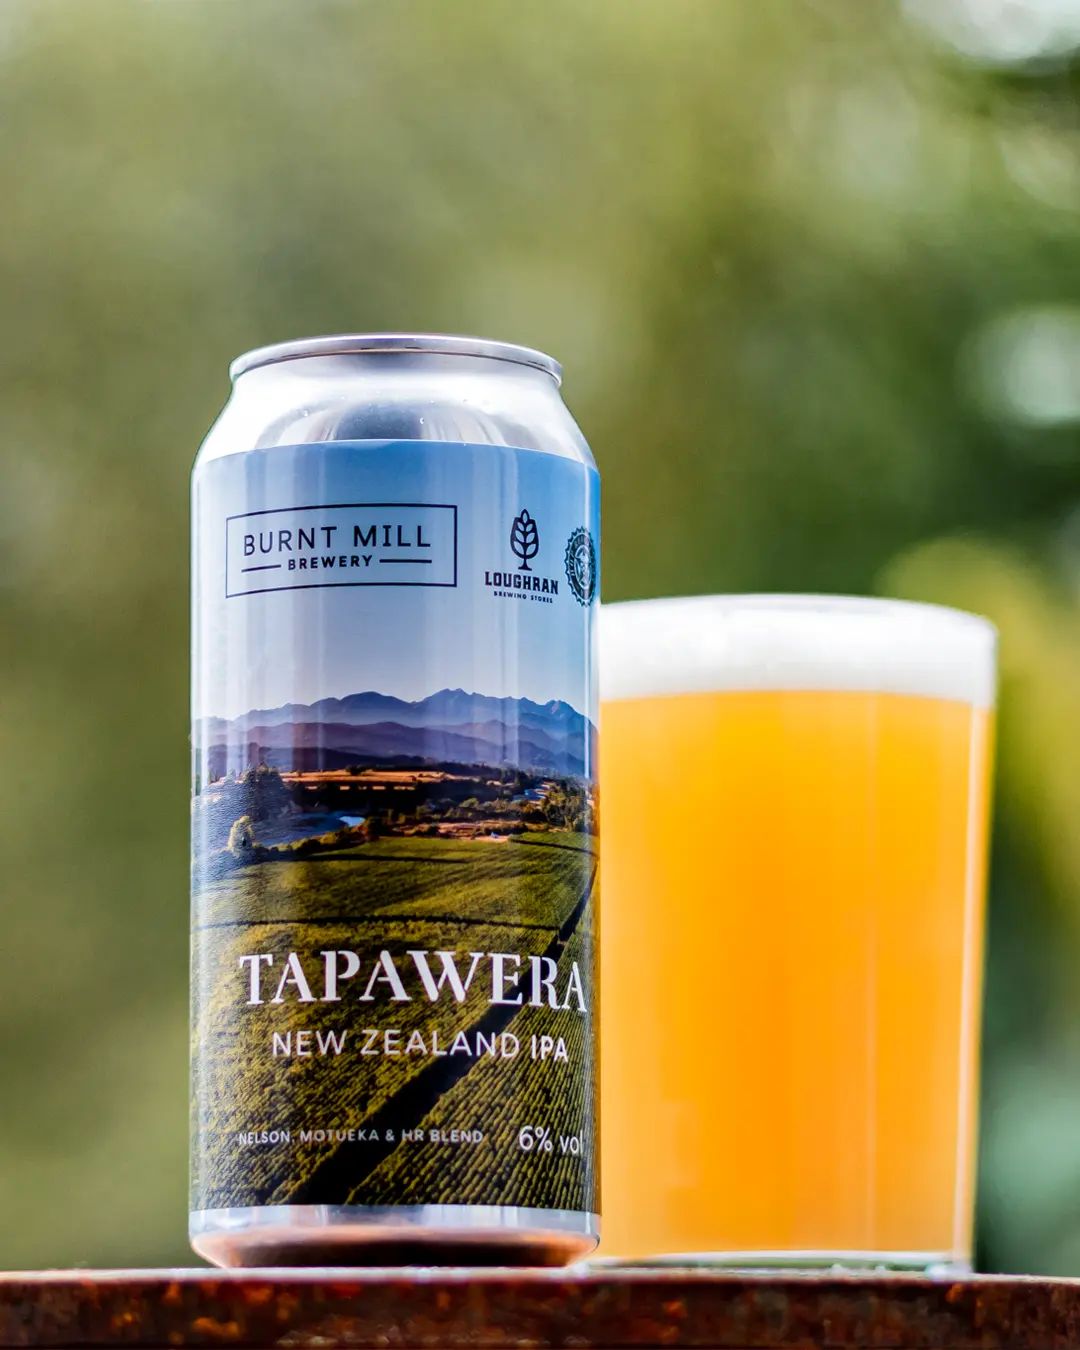 We have been quietly working away on an exciting collaboration with @burntmillbrewery in the UK, and @hoprevolution hop farm in New Zealand this past month.

Named after the small town in the Tasman District of New Zealand's South Island, Tapawera NZ IPA has a classic malt bill of extra pale malt, oats and chit. This is all brought together with Hop Revolution's Nelson Sauvin, Motueka and their Hop Revolution blend to give us a bright vinous ale with elements of gooseberry, citrus and an undercurrent of floral notes. A vibrant IPA and a great representation of Hop Revolution's Kiwi hops!

Jump on over to the @burntmillbrewery page to grab some!

#collab #burntmillbrewery #hoprevolution #hops #motueka #nelsonsauvin #IPA #malt #irishmalt #brewing #brewday #beer